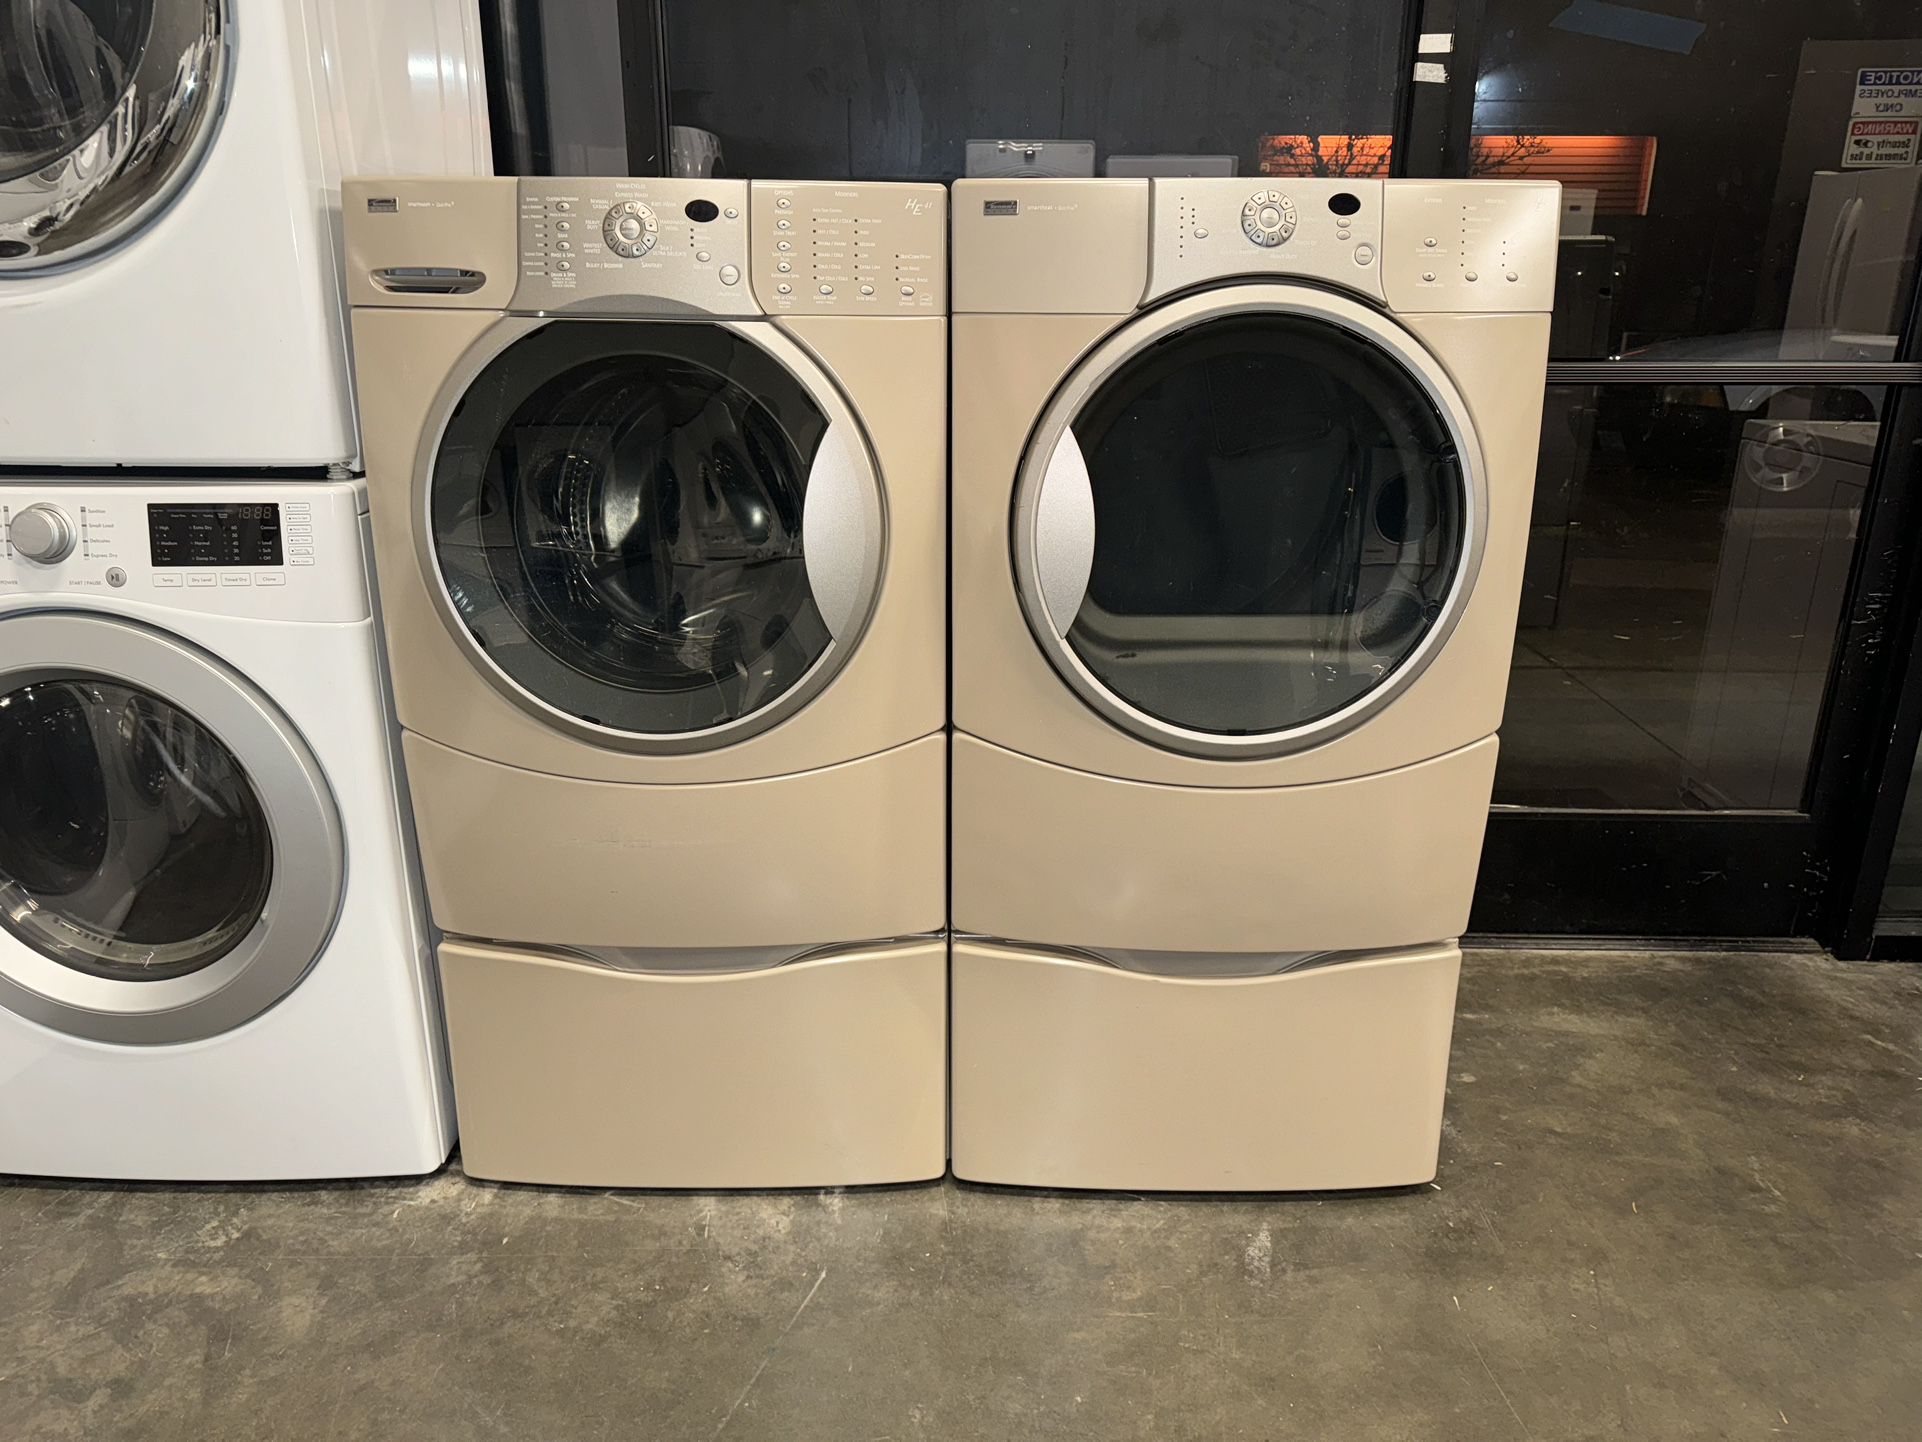 KENMORE XL CAPACITY WASHER DRYER ELECTRIC SET 